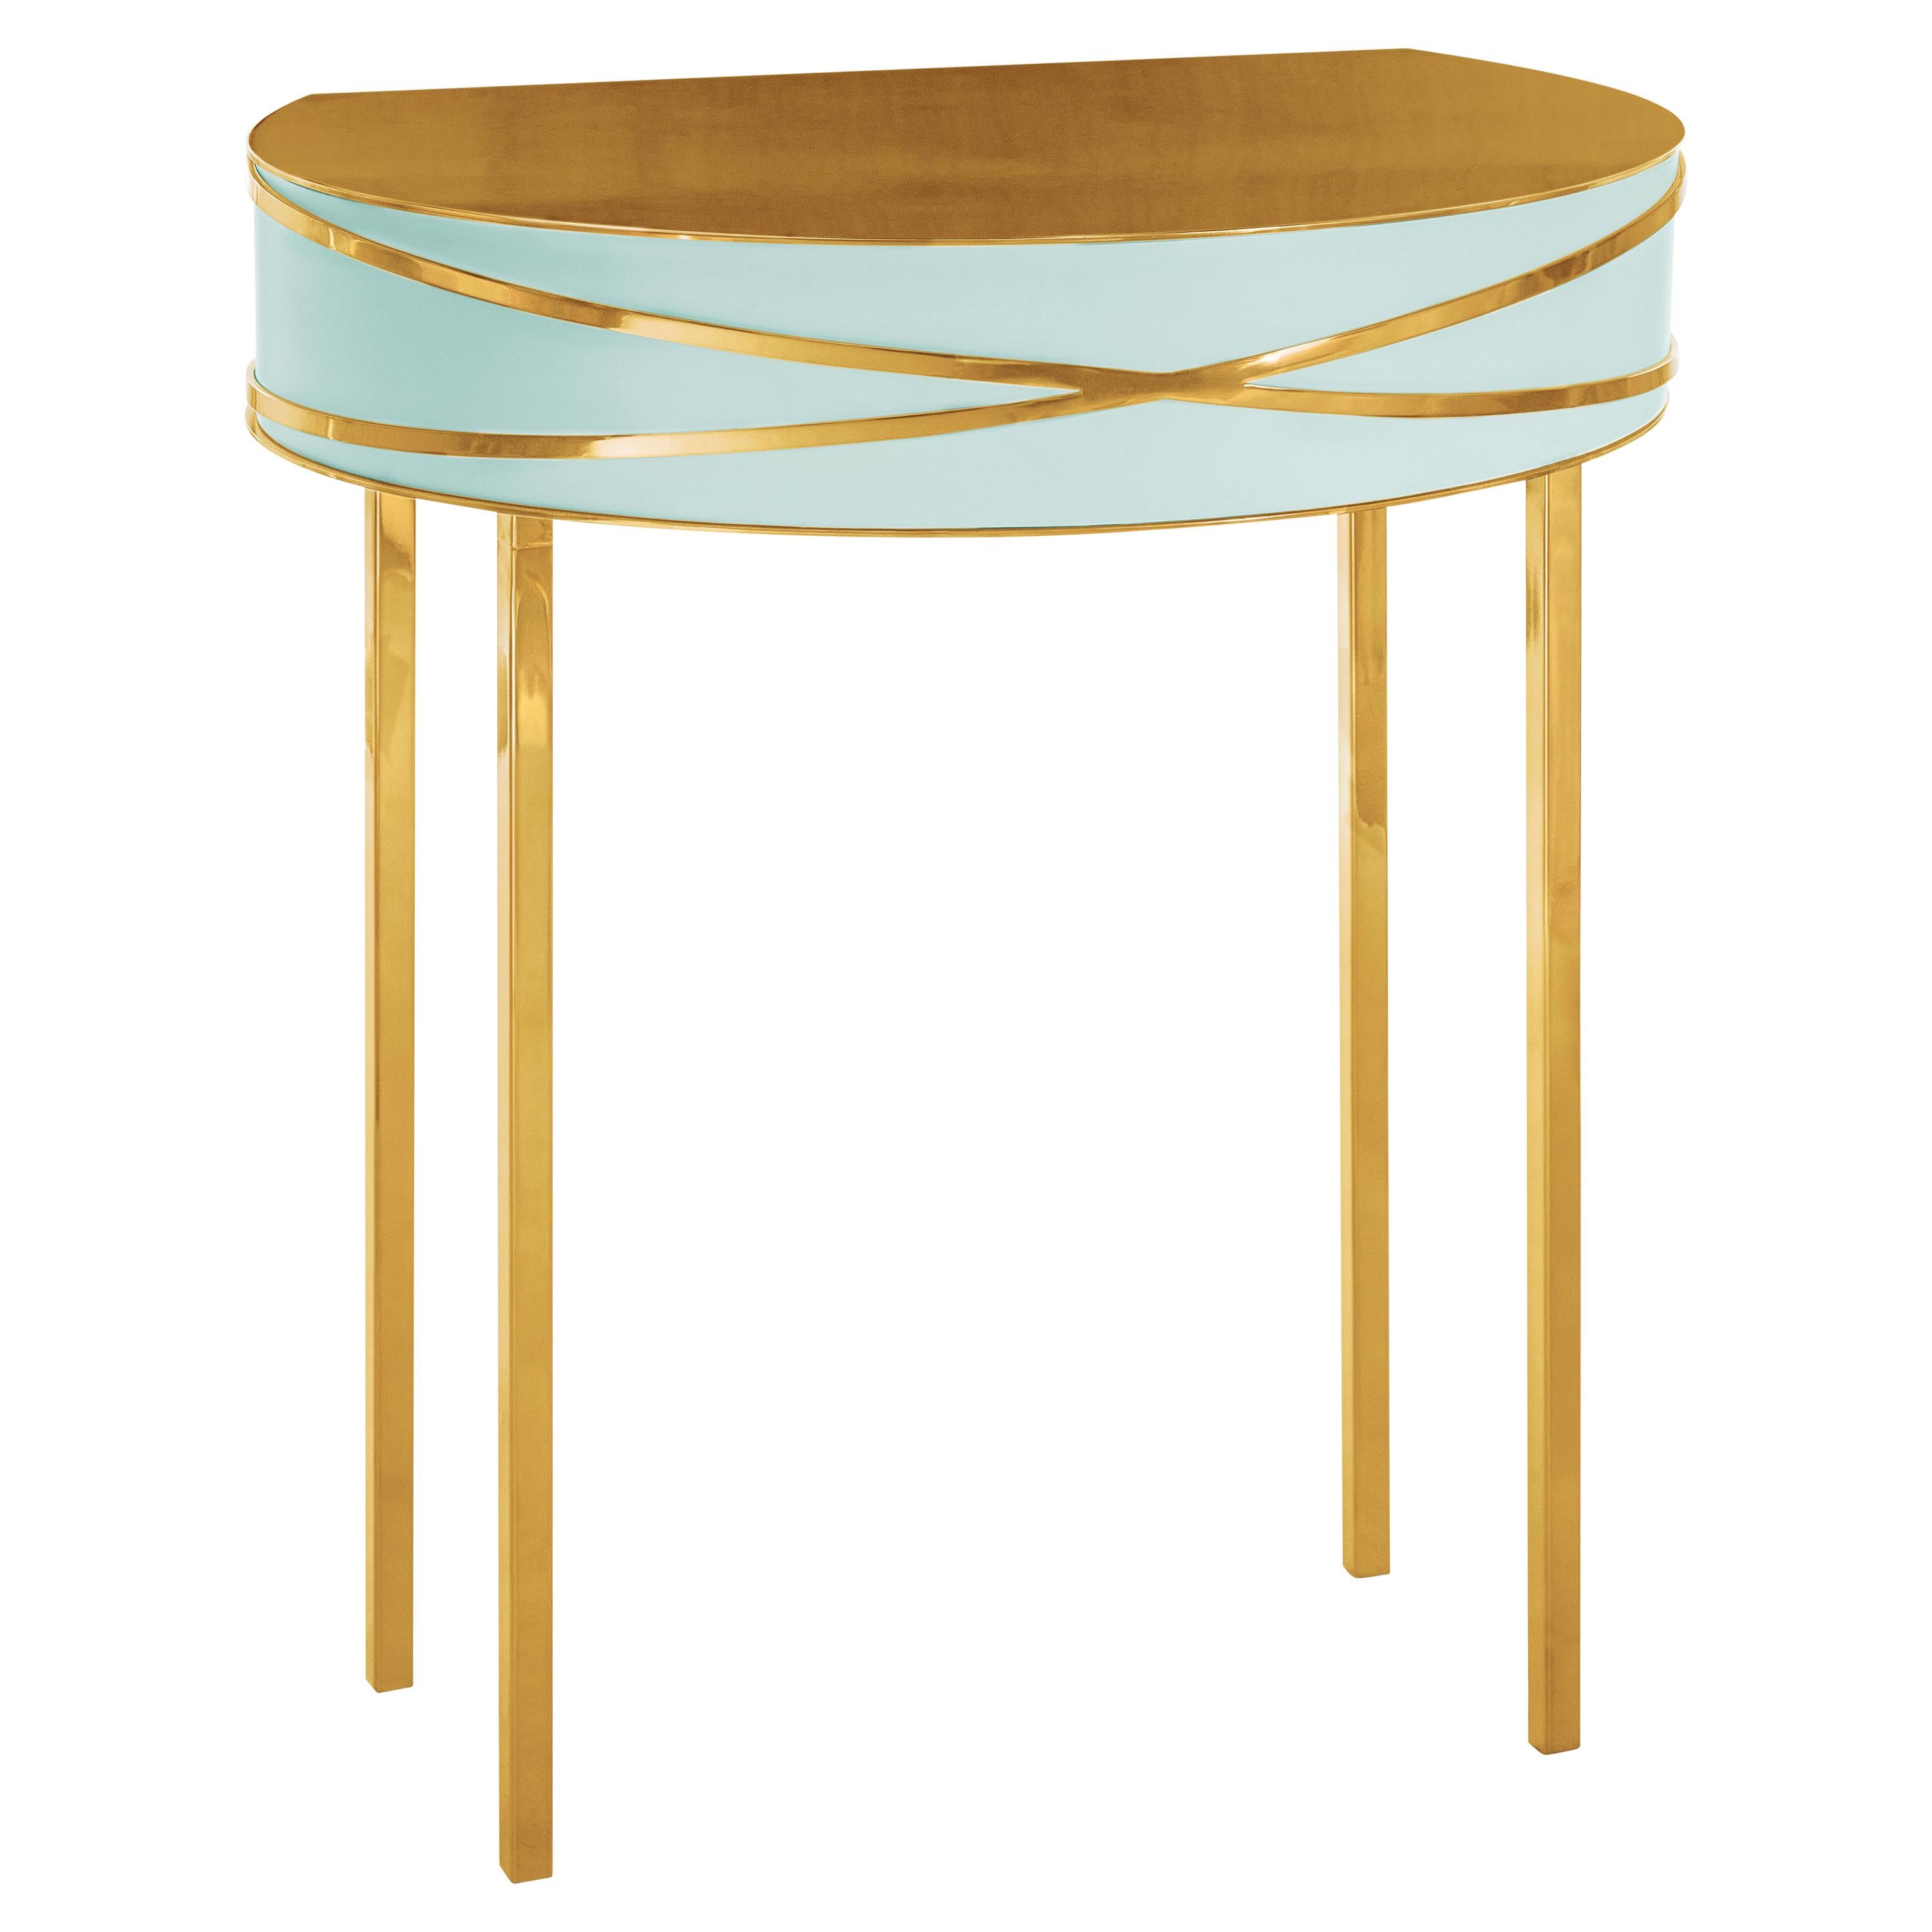 Stella Mint Green Console or Bedside Table with Gold Trims by Nika Zupanc